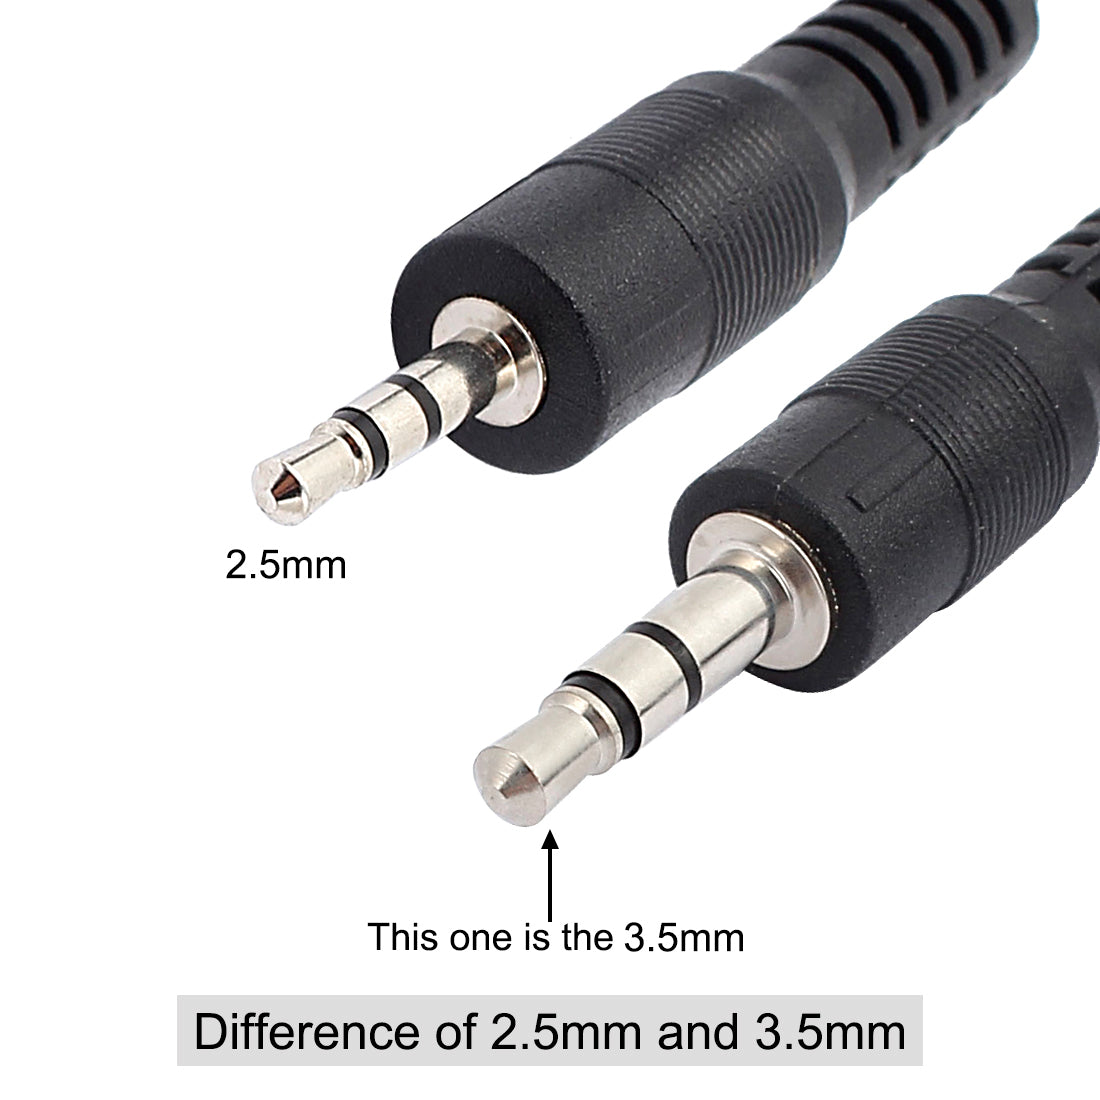 uxcell Uxcell IR Infrared Receiver Extender Cable 3.5mm Jack 4.9FT Long 26-39FT Receiving Distance Single Black Head 5pcs